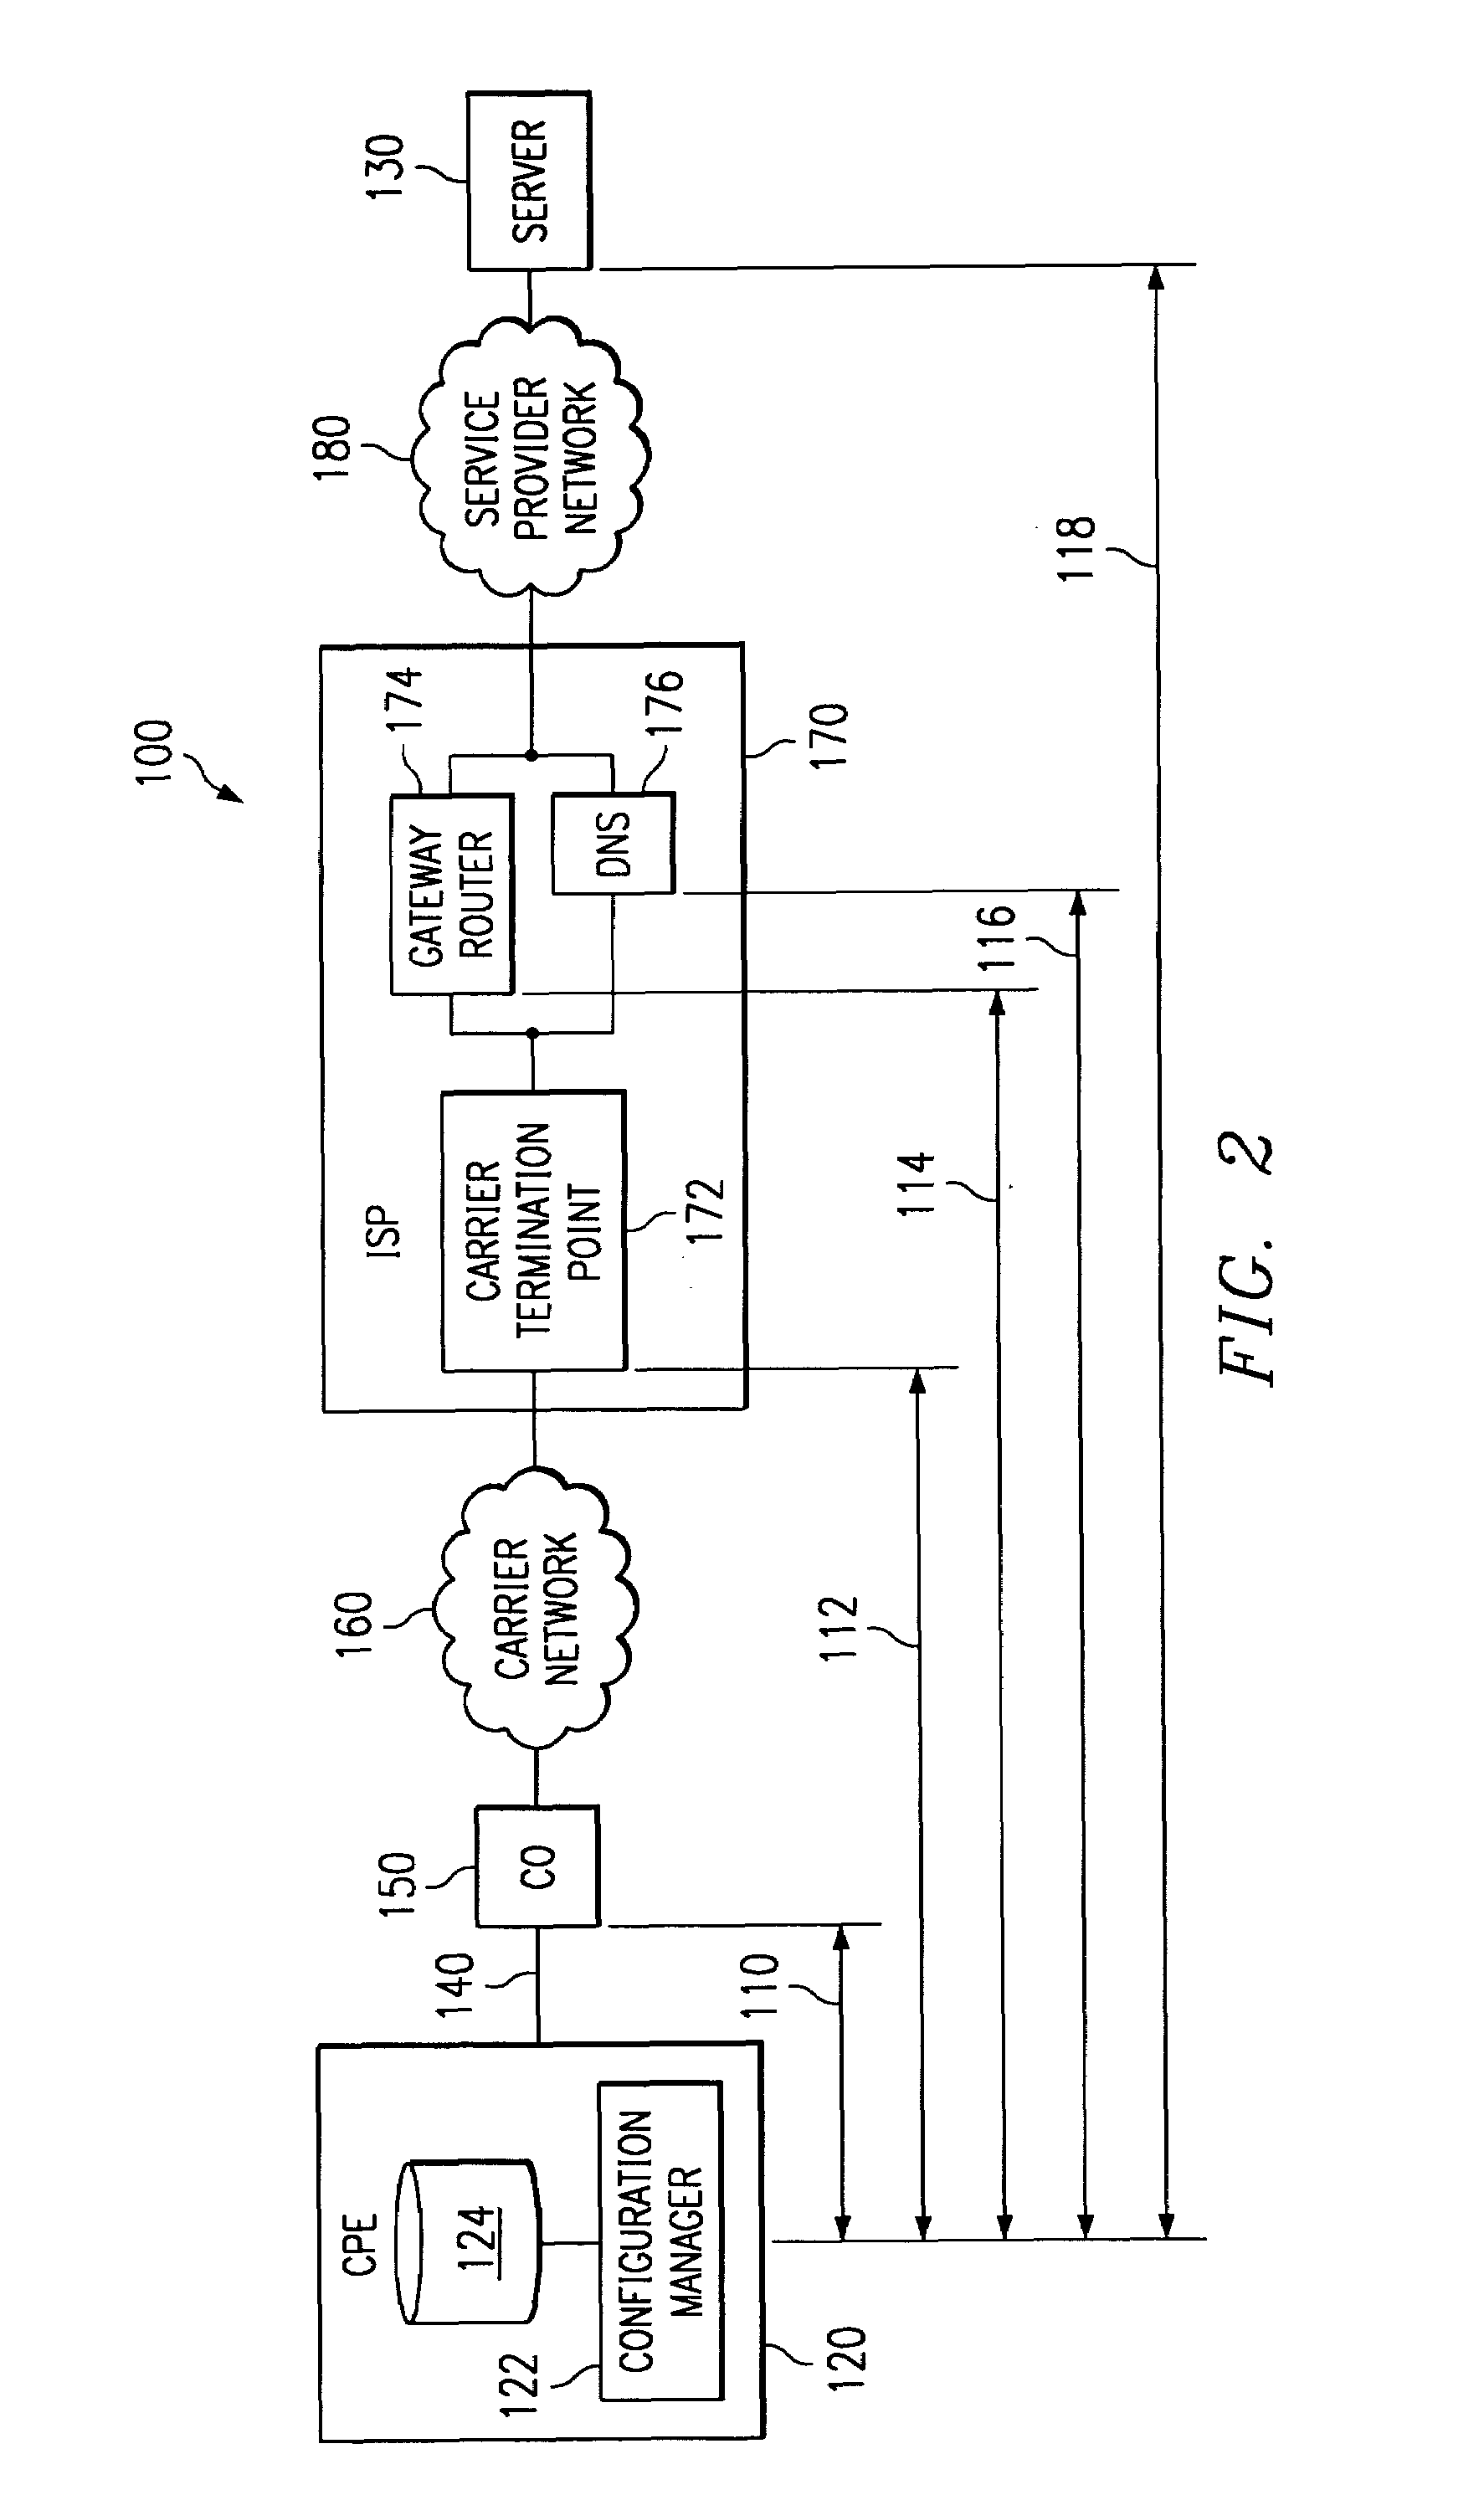 Method and apparatus for automated assistance in configuring customer premises equipment